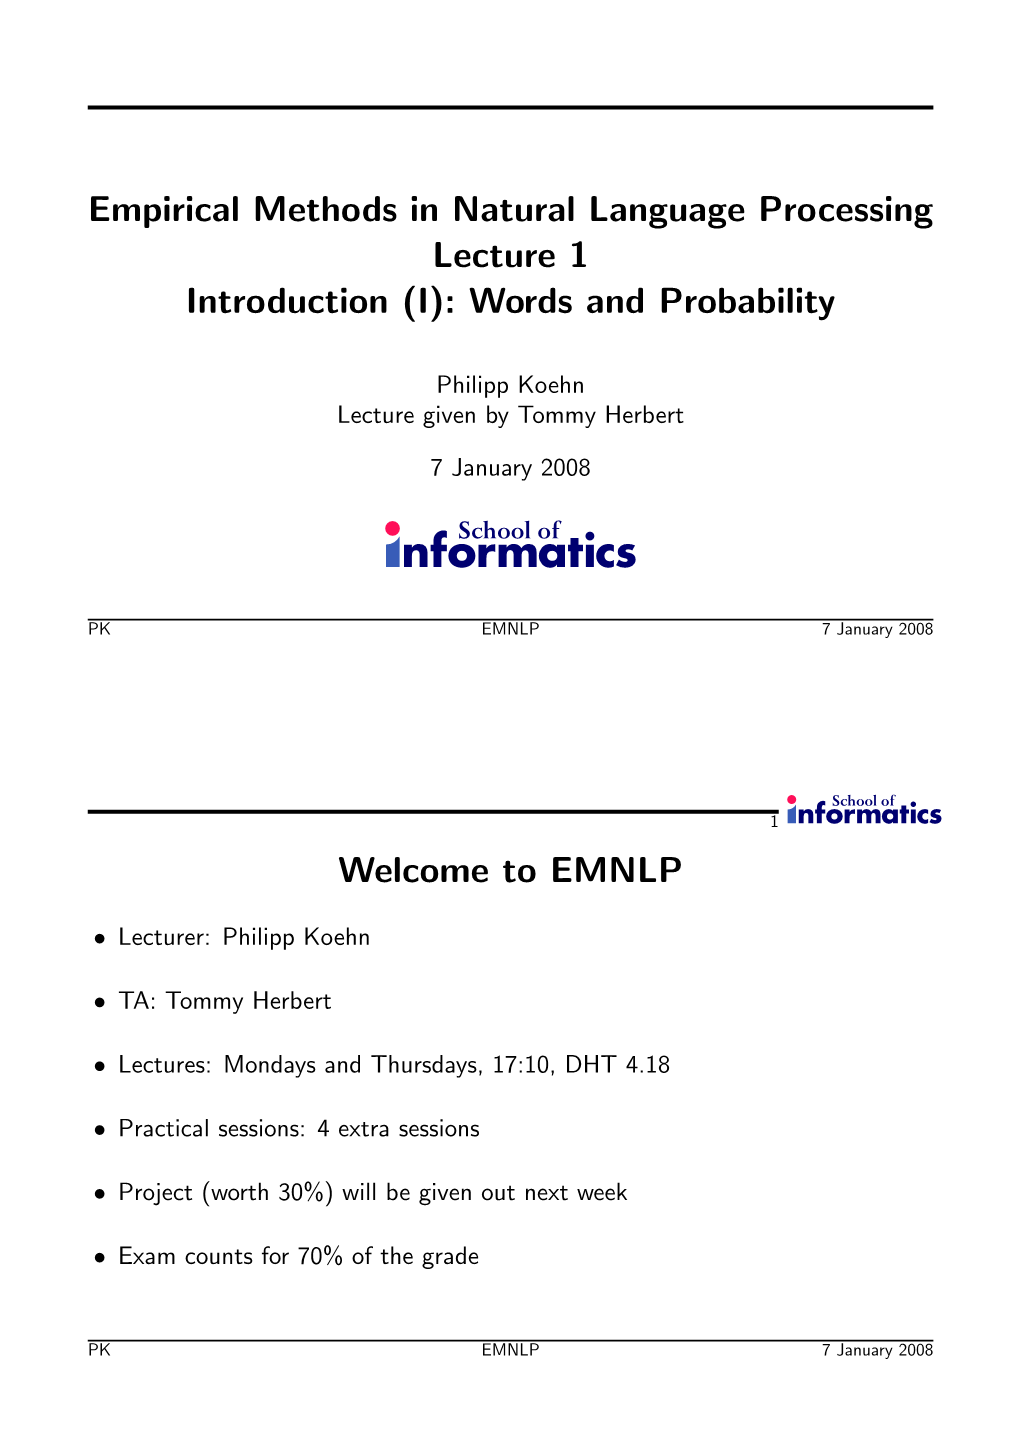 Empirical Methods in Natural Language Processing Lecture 1 Introduction (I): Words and Probability Welcome to EMNLP